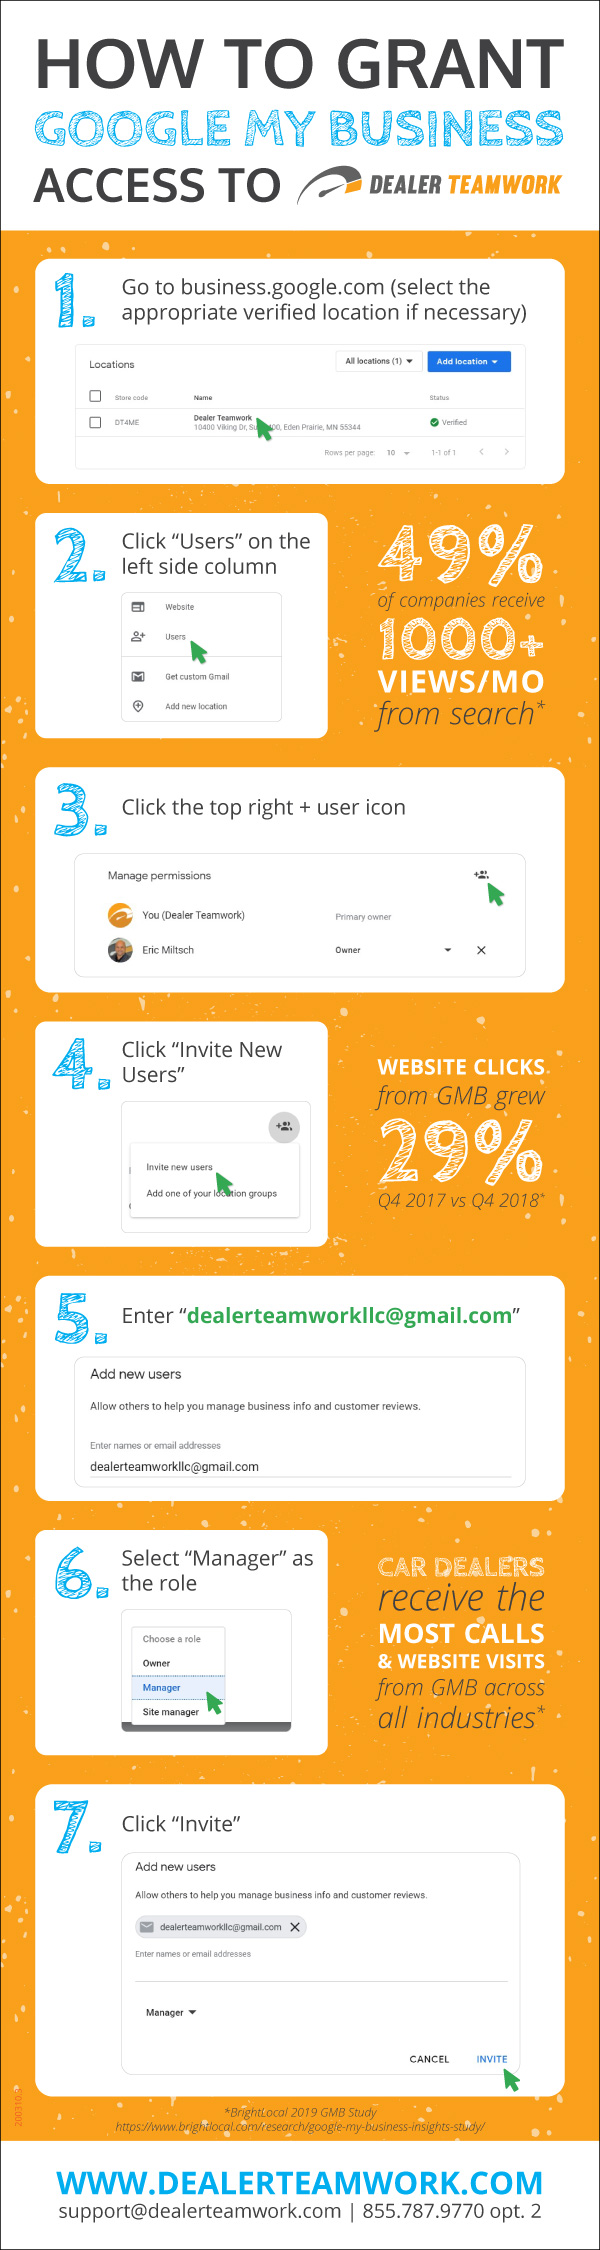 Infographic Listing Steps to Grant Dealer Teamwork Google My Business Access with Screenshots